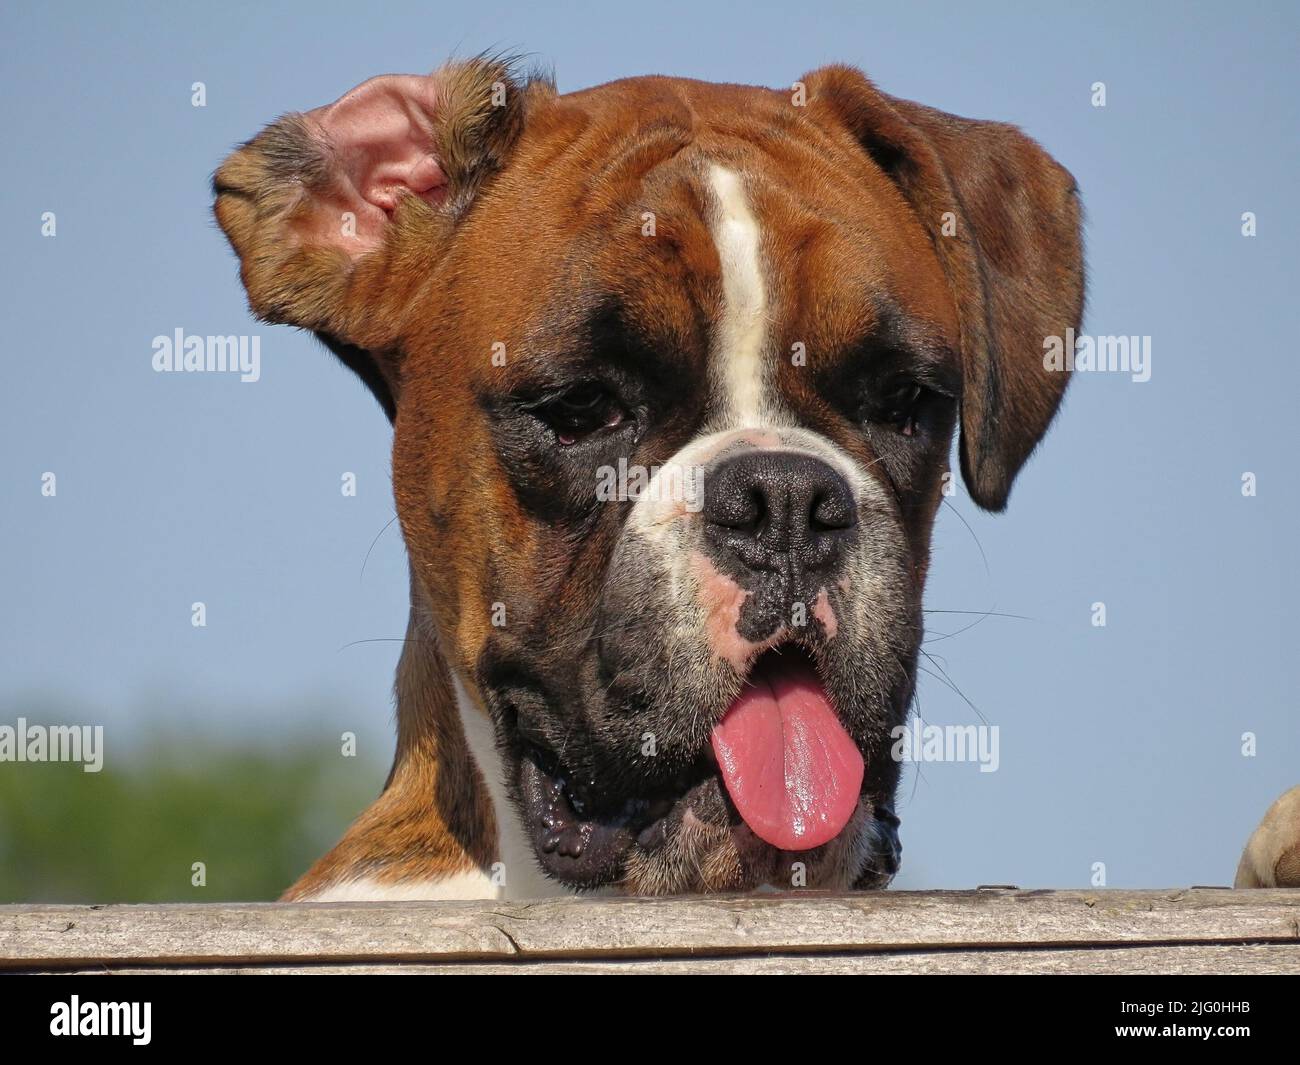 Boxer dog with tongue hanging out looking over a garden fence with sky background Stock Photo